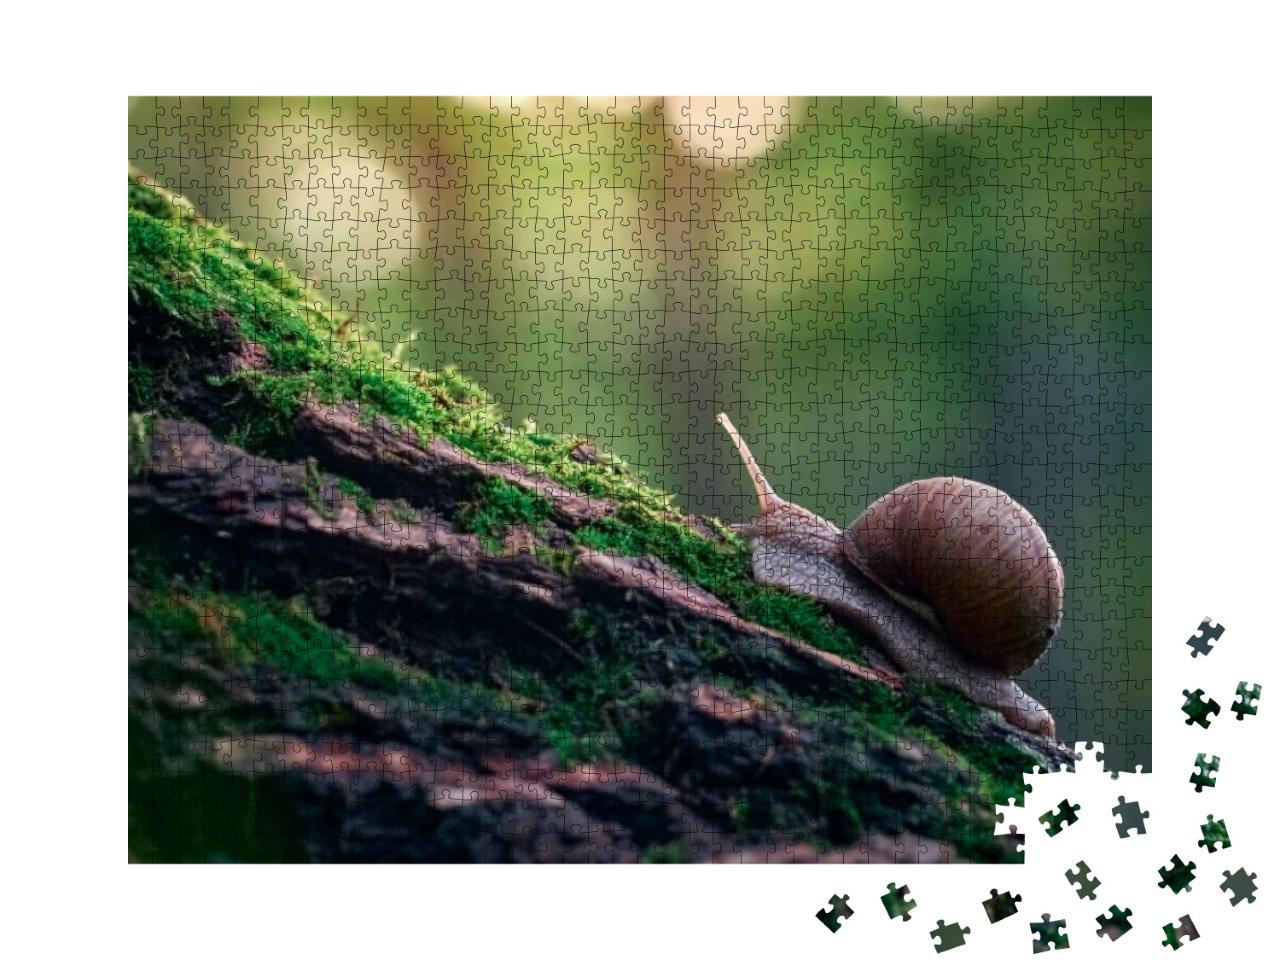 A Slow Grape Snail Crawls Up the Bark of a Tree Overgrown... Jigsaw Puzzle with 1000 pieces